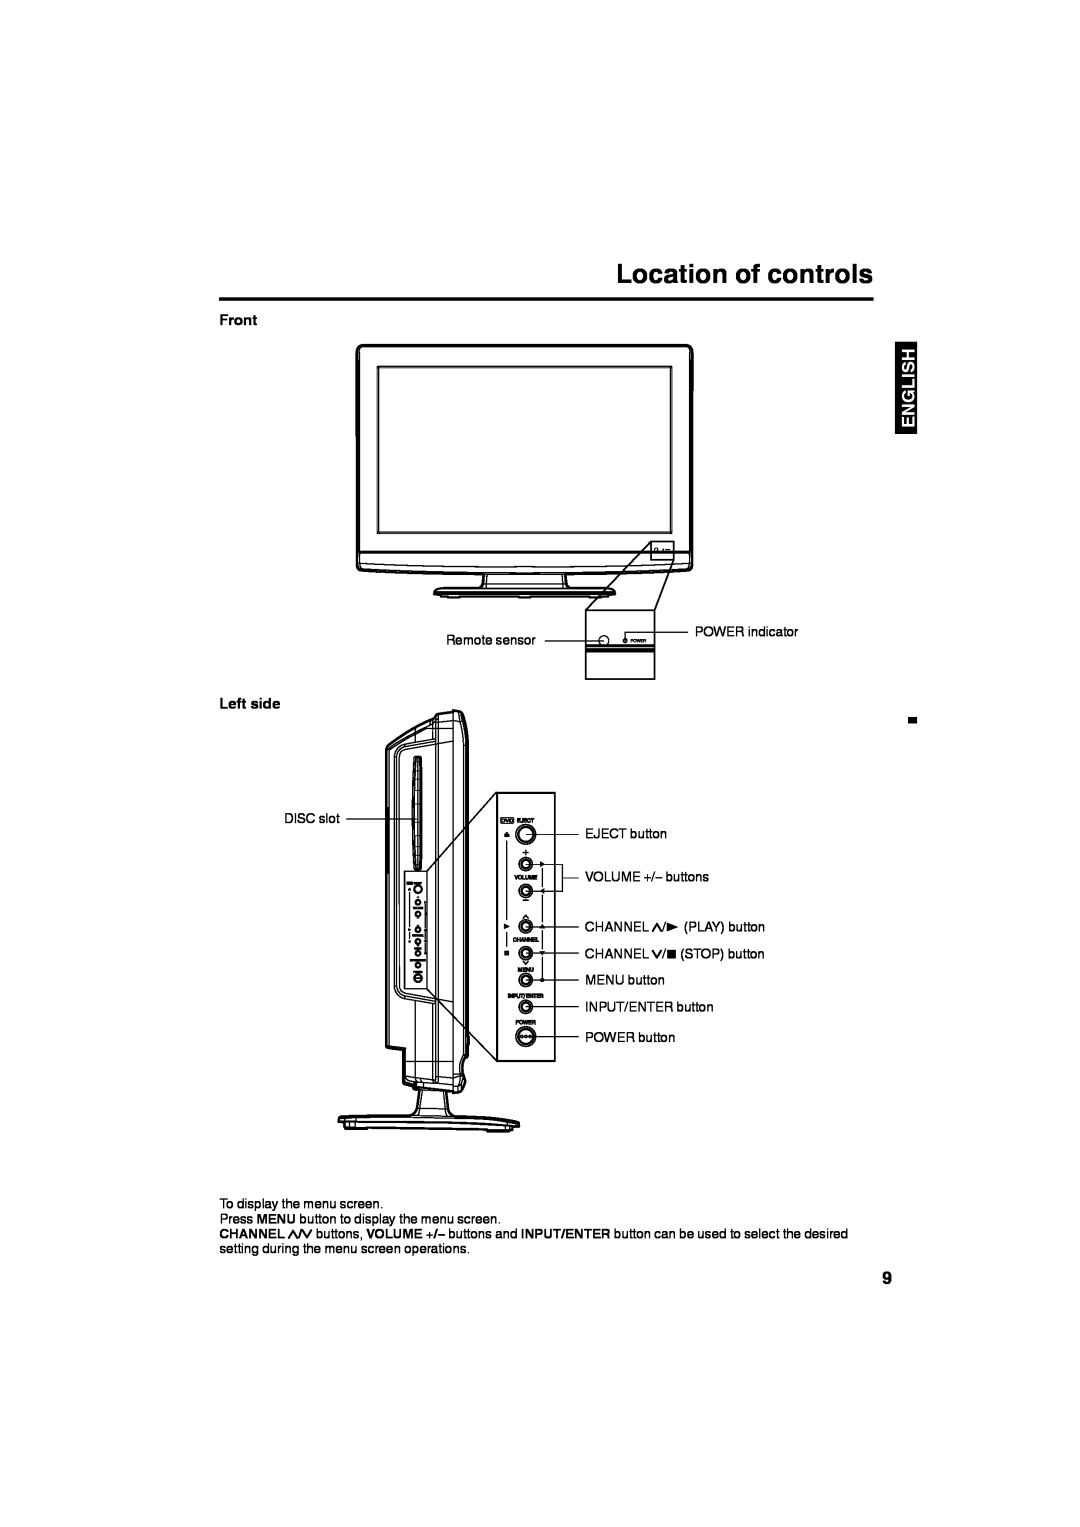 Sansui HDLCDVD265 owner manual Location of controls, Front, Left side, English 